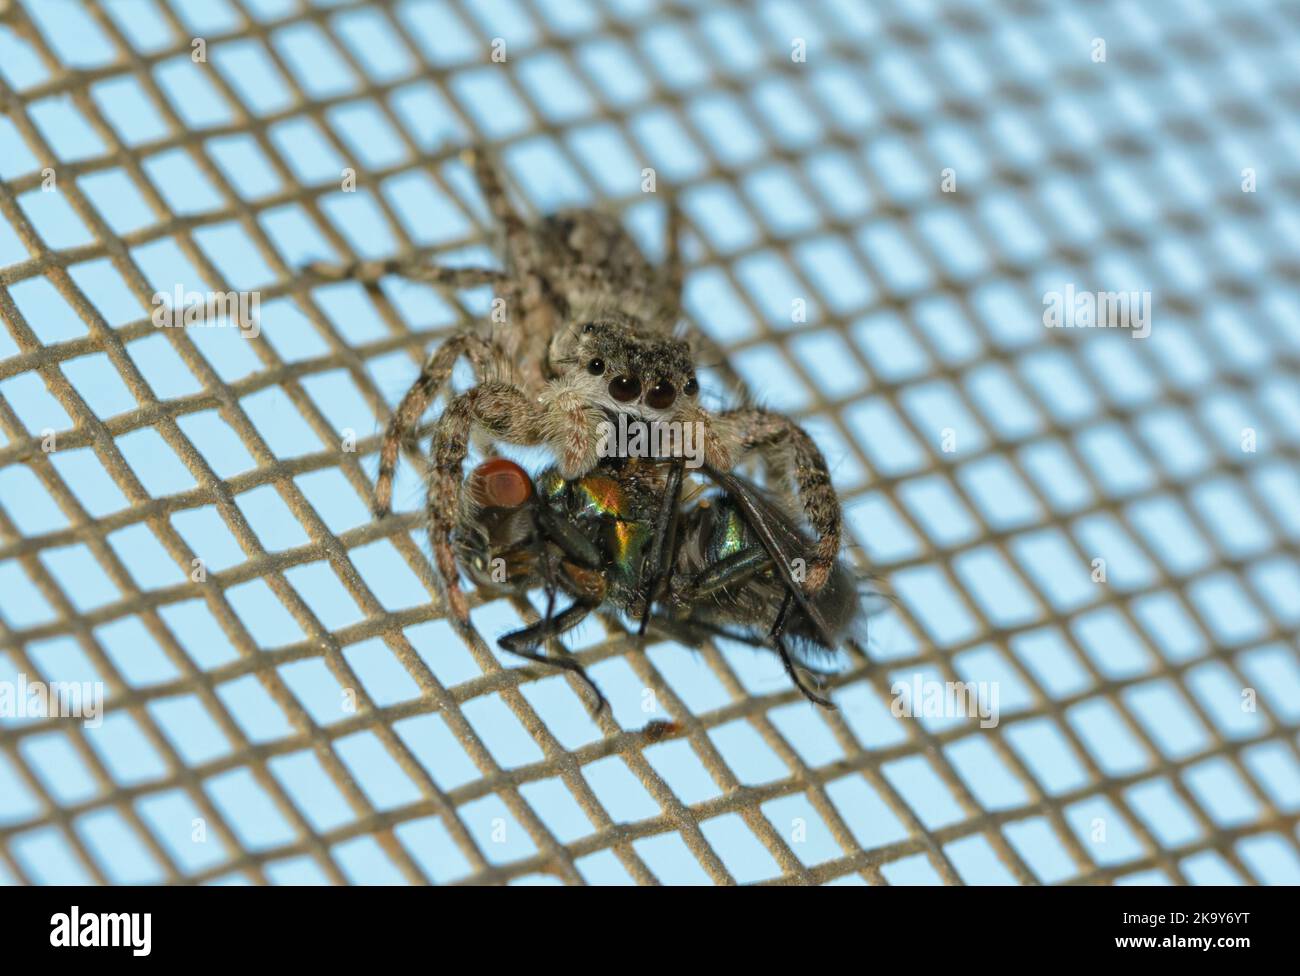 Female Tan jumping spider holding a fly in her pedipalps while hanging onto a window screen Stock Photo